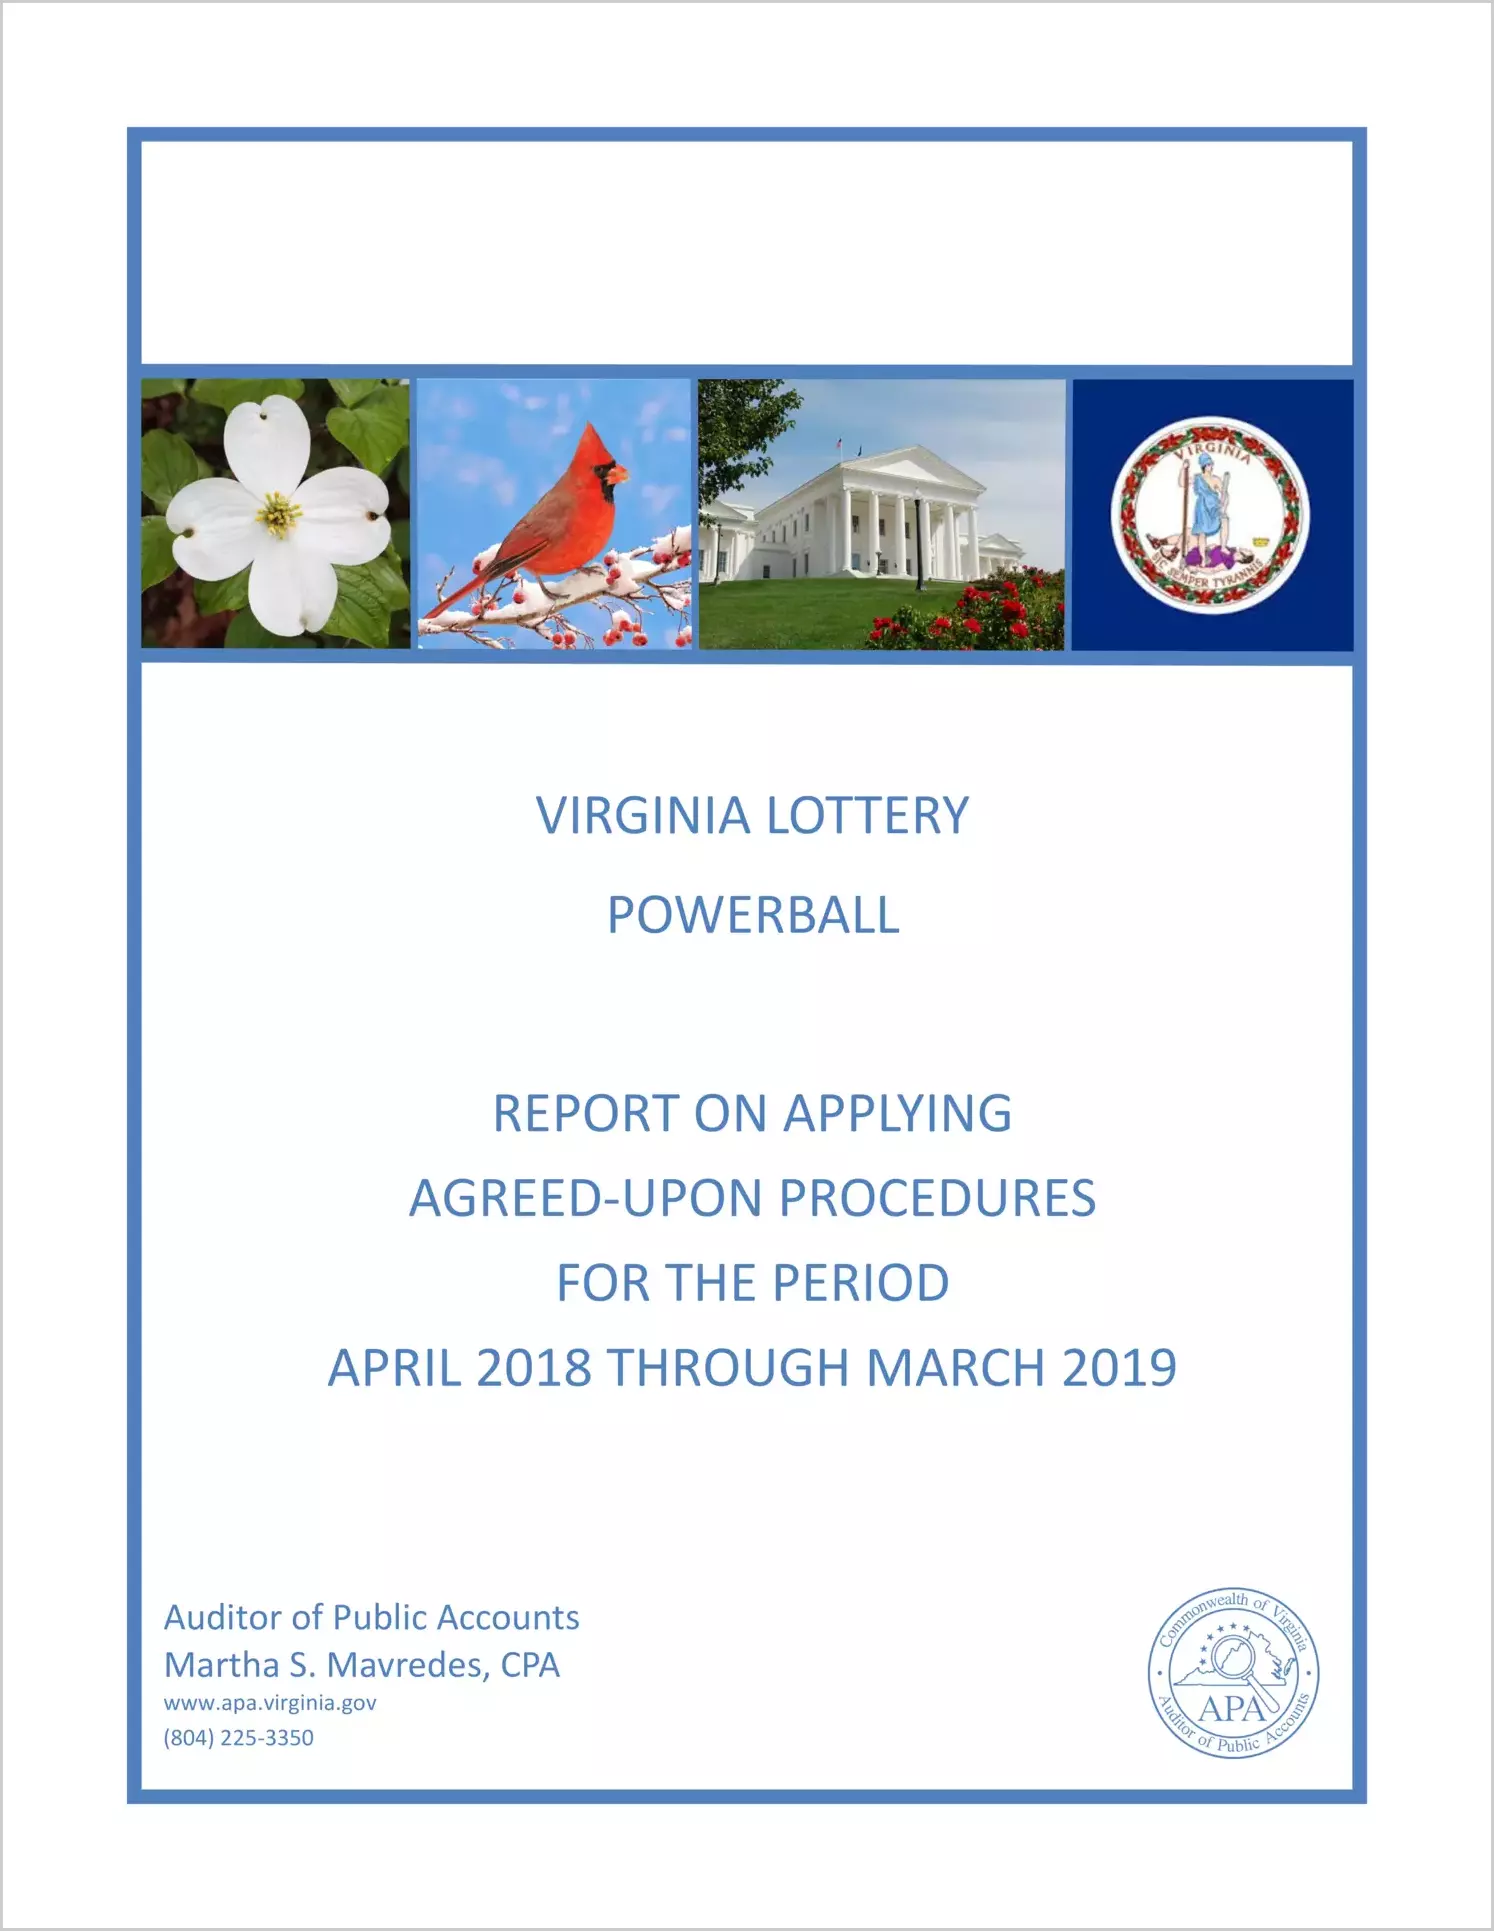 Virginia Lottery Powerball Report on Applying Agreed-Upon Procedures for the period April 2018 through March 2019